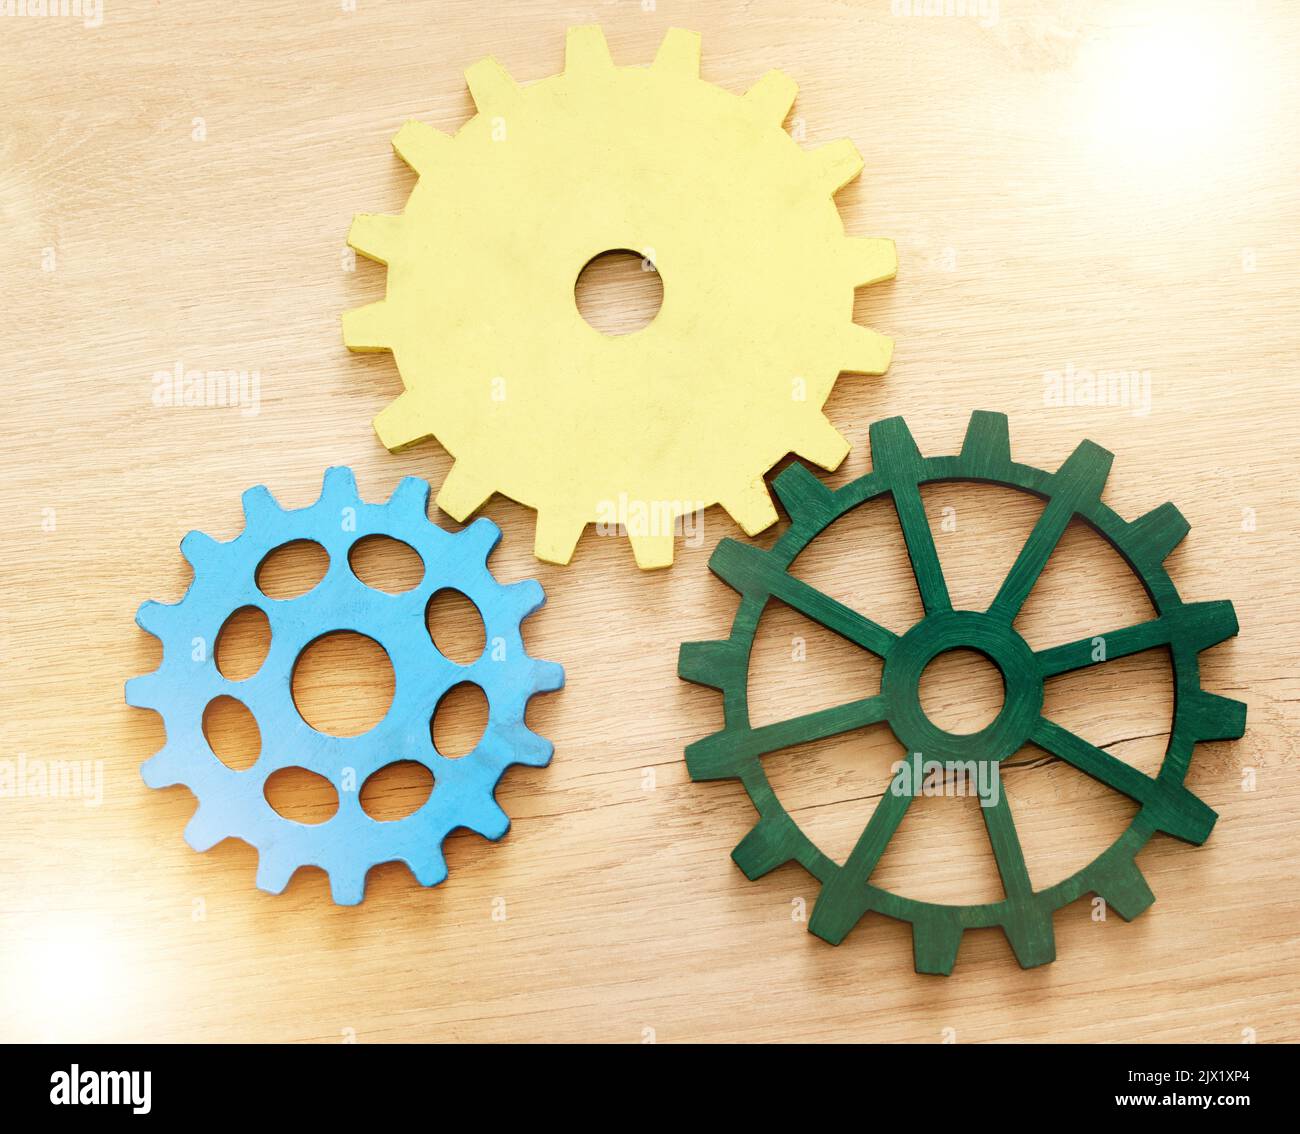 Collaboration, engineering and construction concept with industrial gears, mechanics and cogs on a table or desk in an office. Teamwork, synergy and Stock Photo